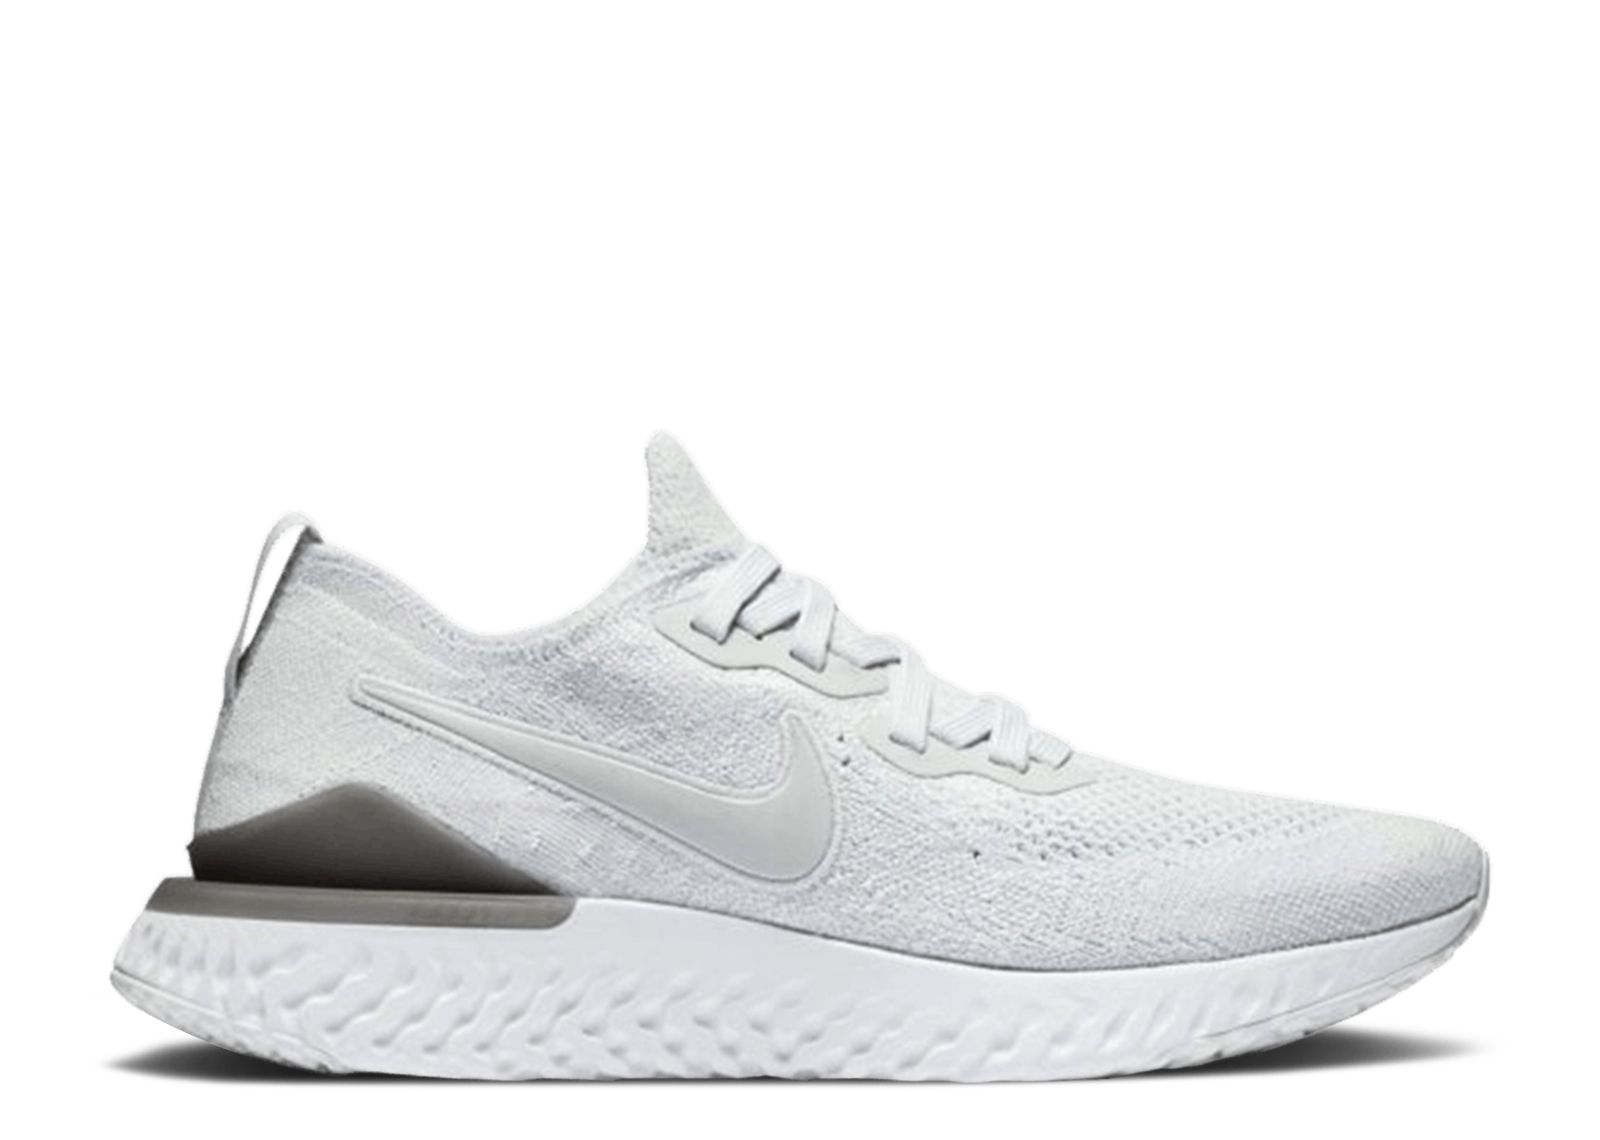 Кроссовки Nike Epic React Flyknit 2 'Pure Platinum', белый nike epic react flyknit women s rhea braided flying woven running shoes size 36 40